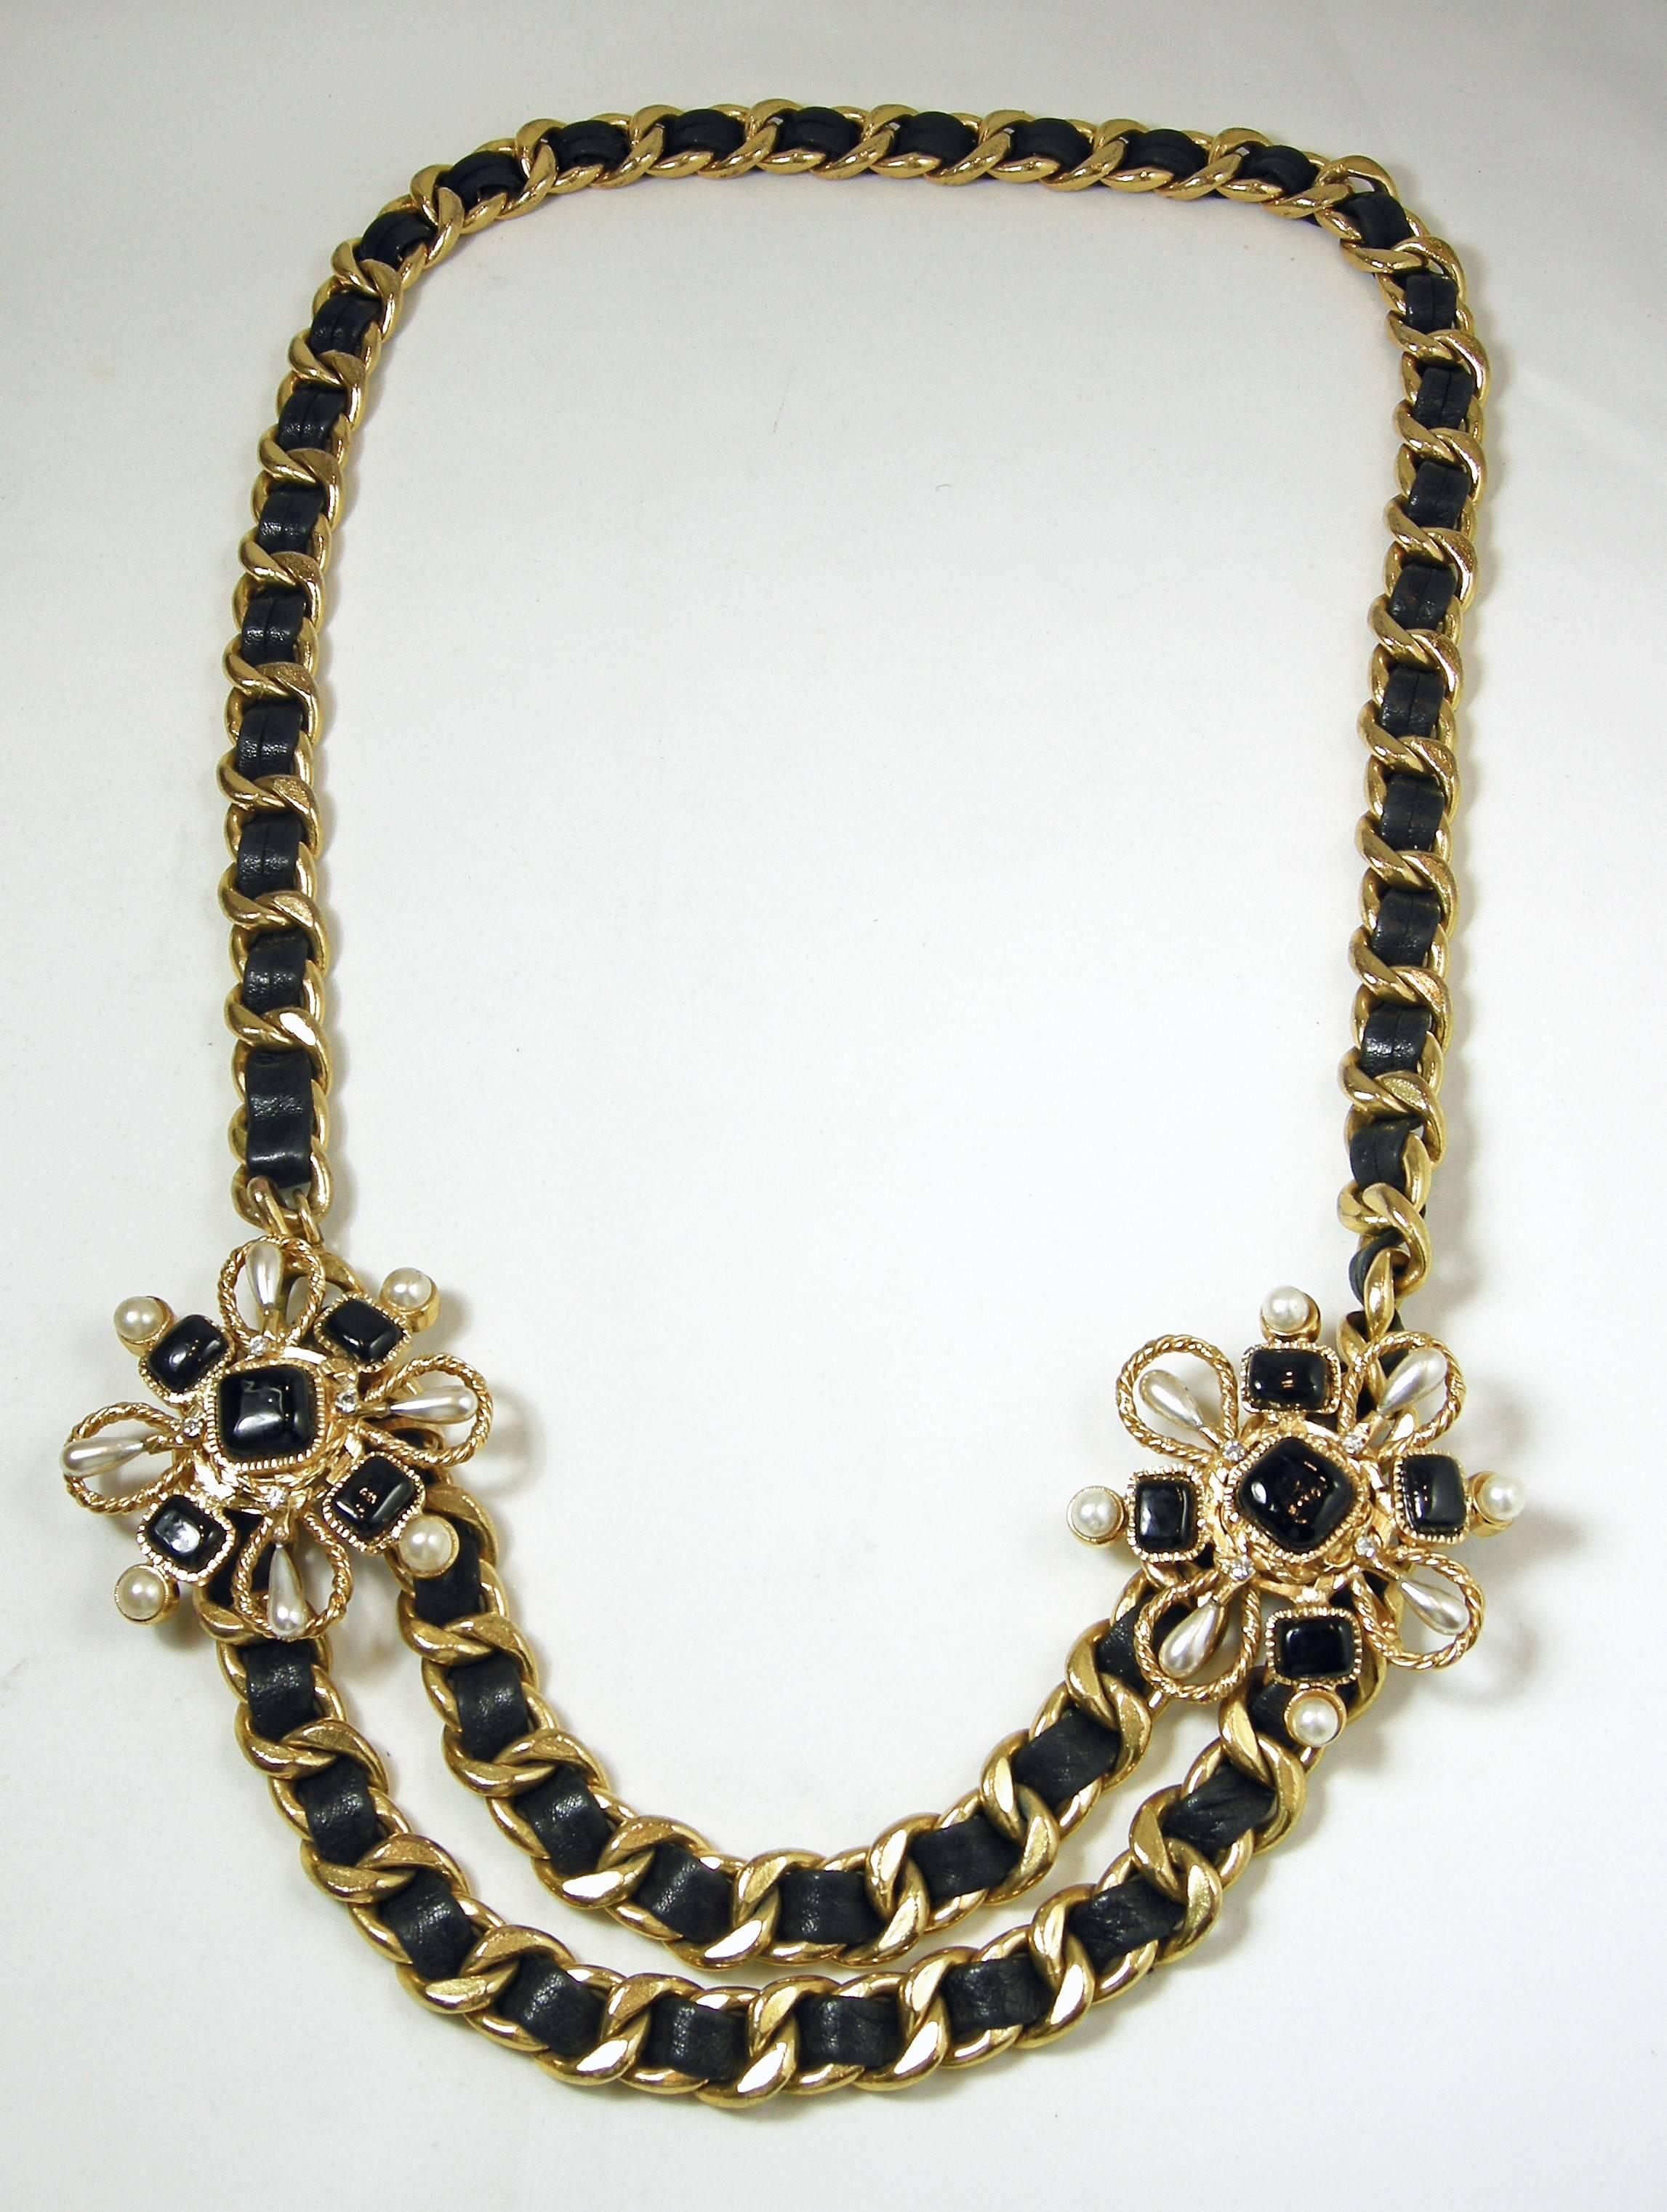 This is a special couture vintage Chanel necklace with Chanel’s famous leather ribbon through the gold tone links. It has two layers at the bottom met by two floral black Gripoix squares and pearls spearing outward on each side. It has a hook clasp